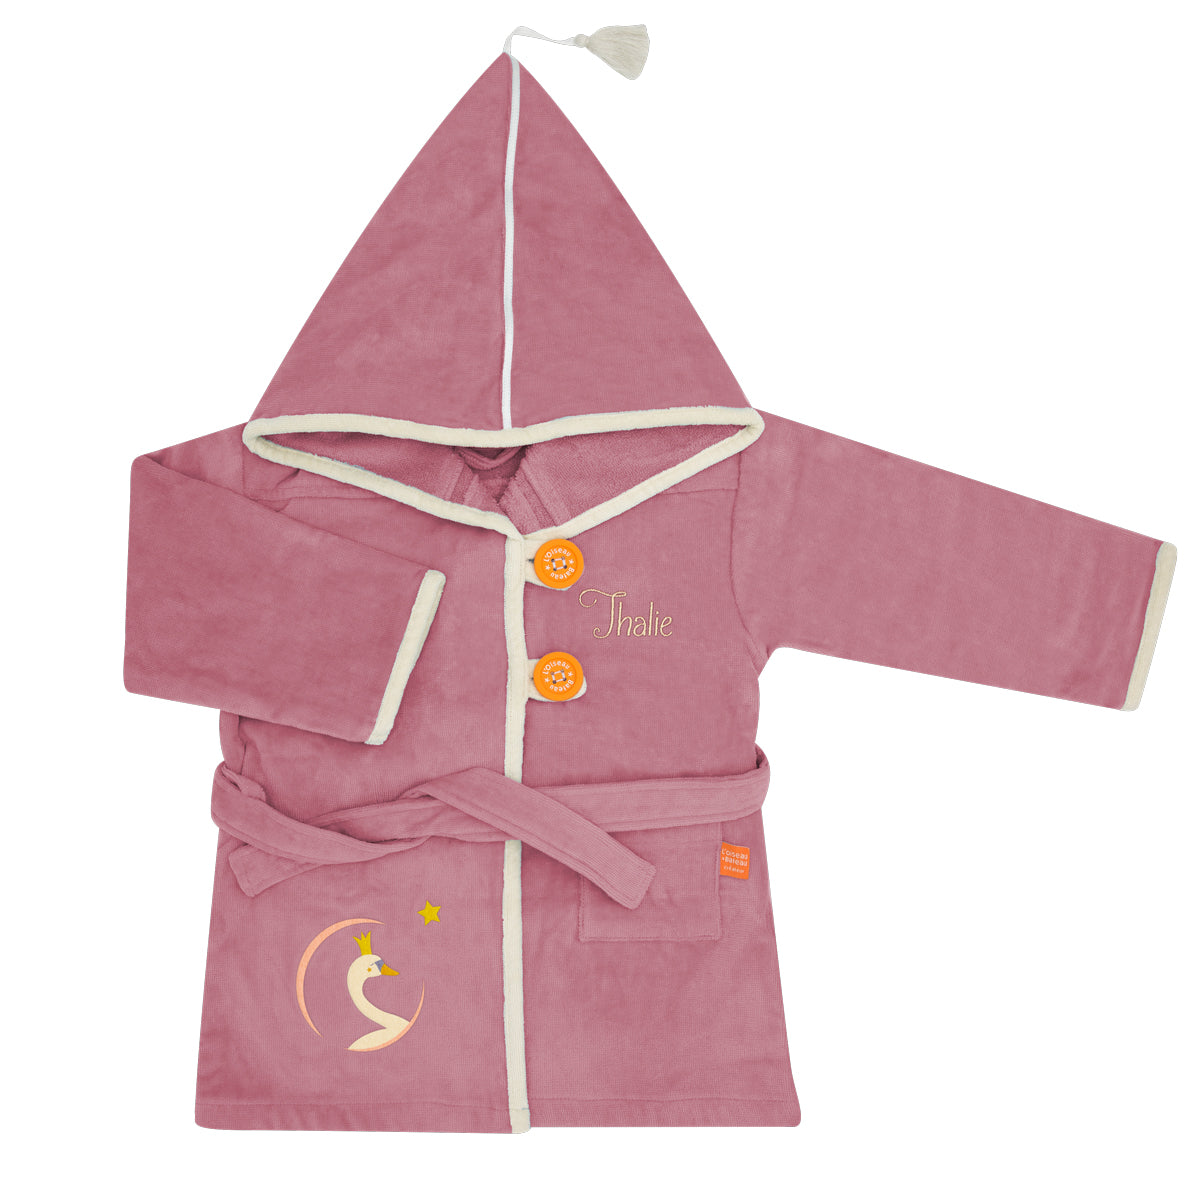 Personalized bathrobe for children - Old Pink Swan